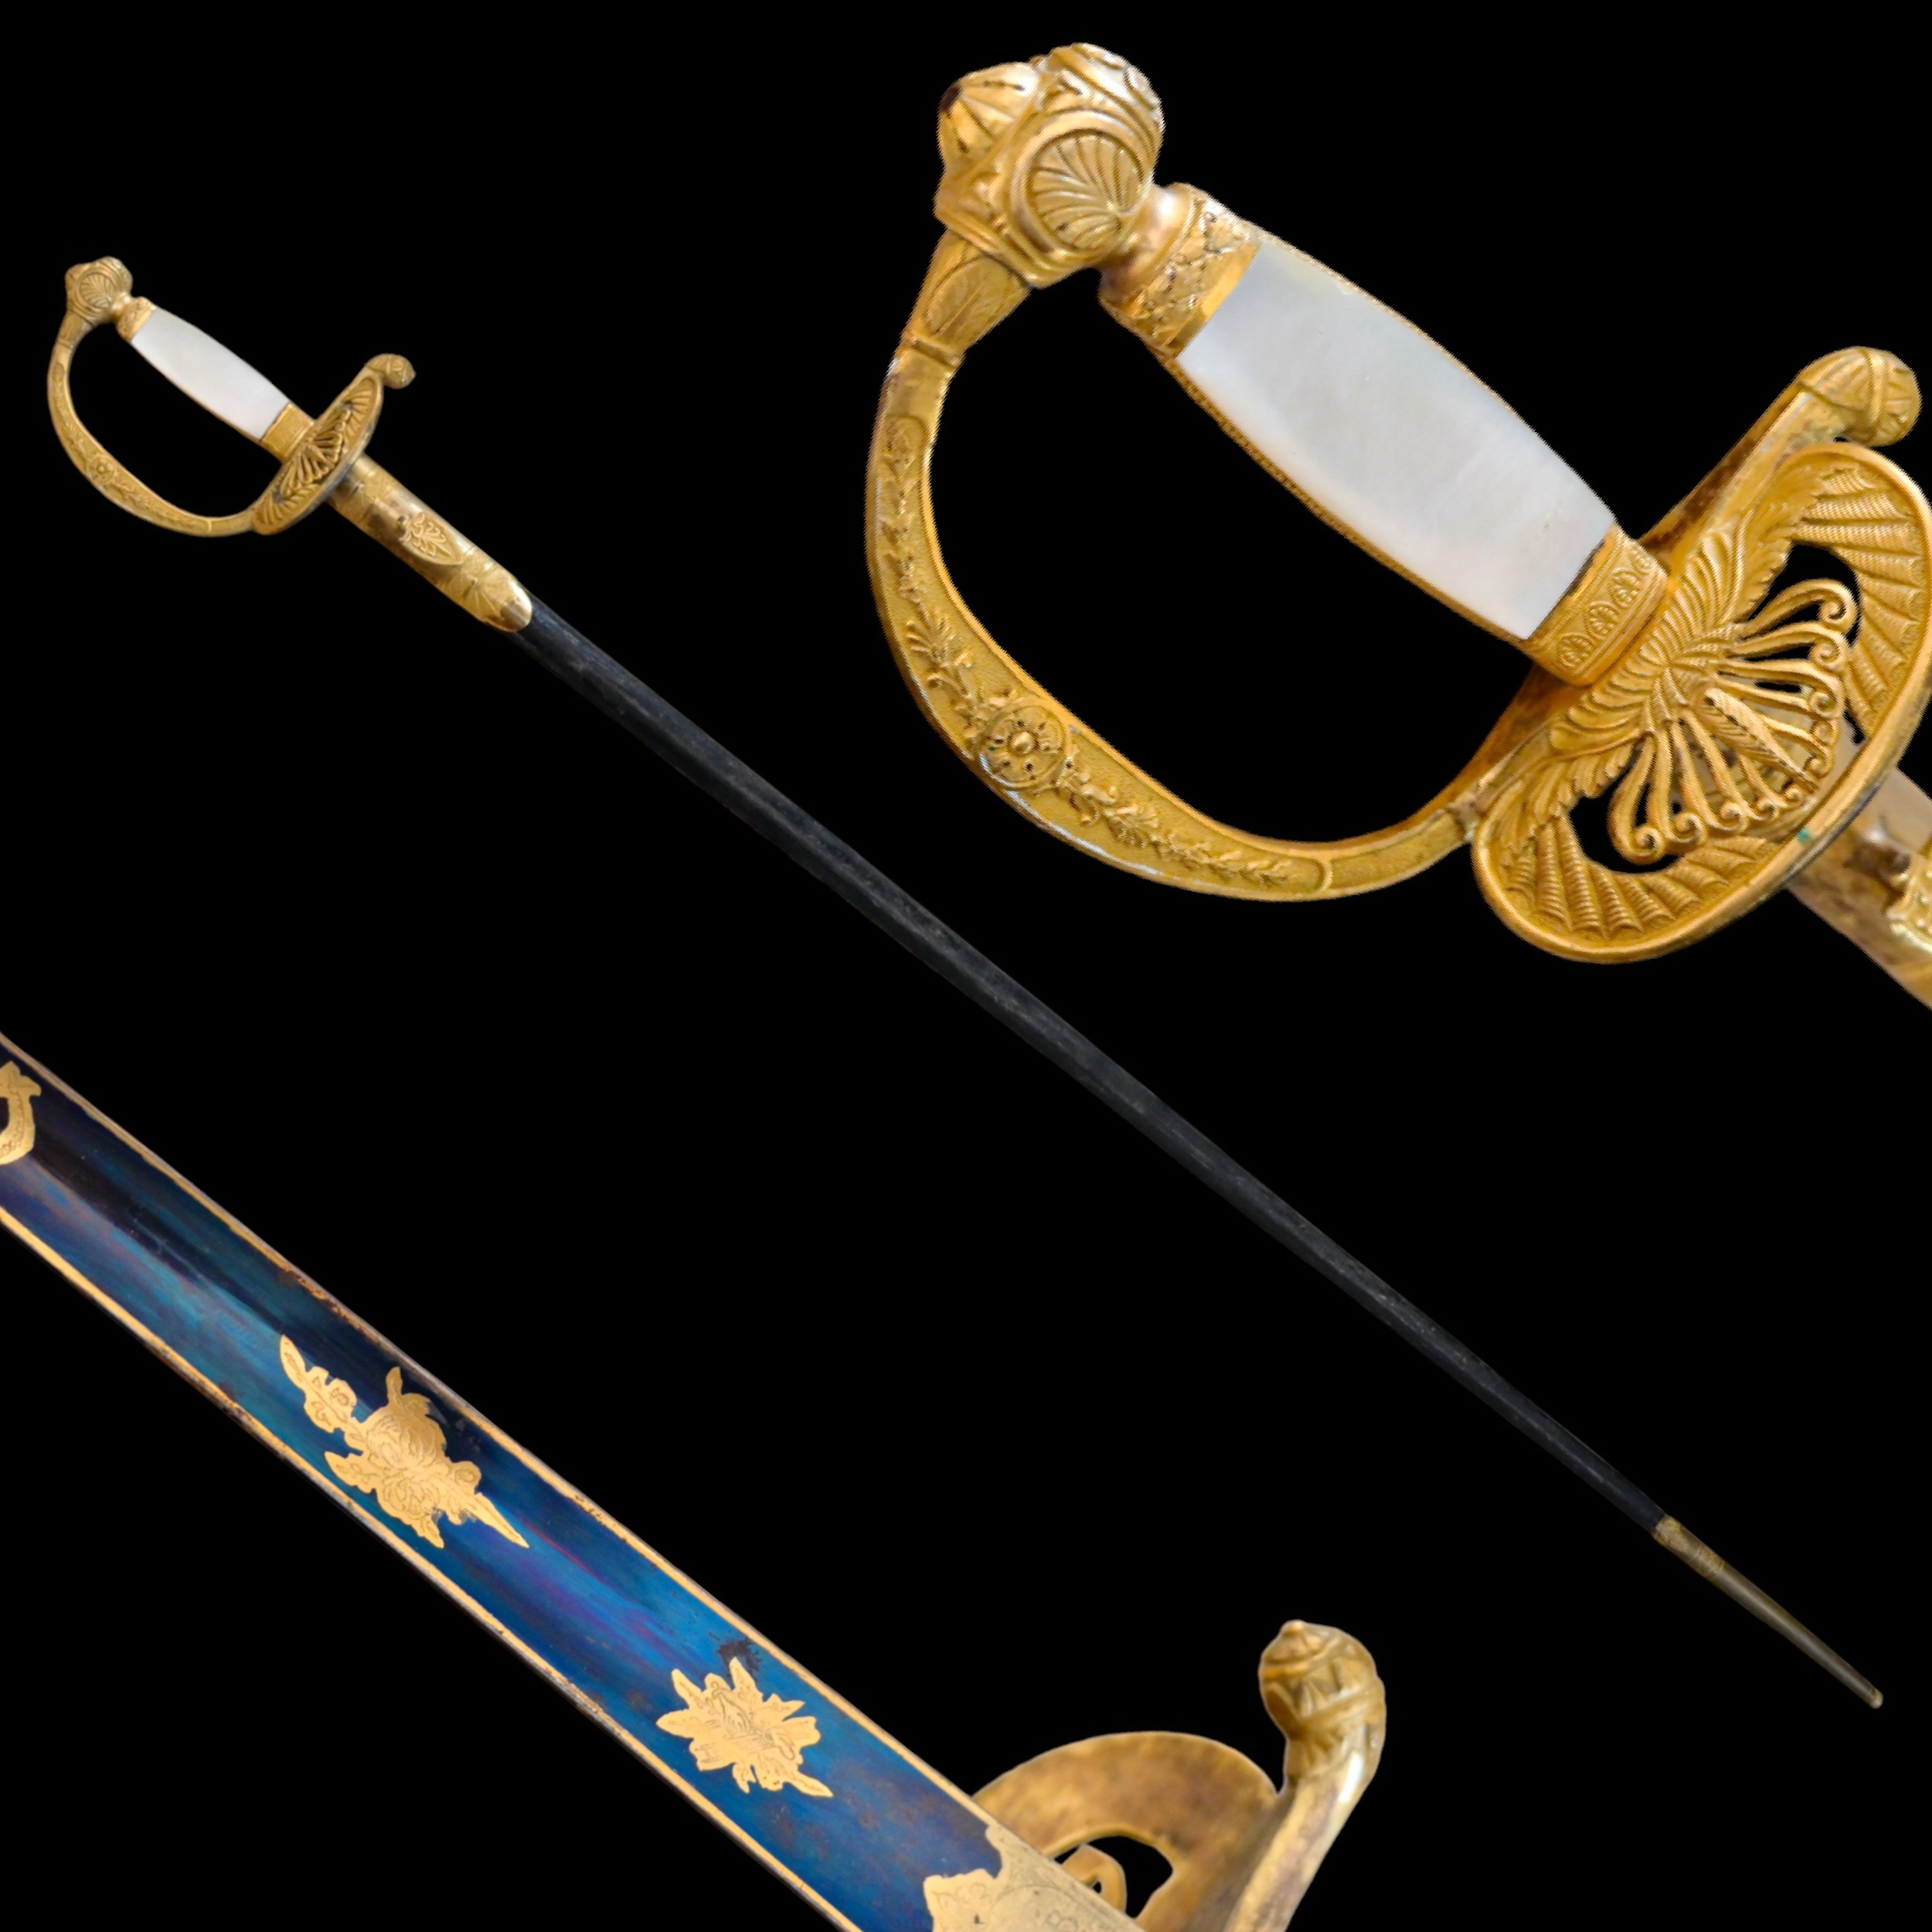 Extremely rare, First Empire, late 18th C smallsword for the founders of the "Institute of Egypt".